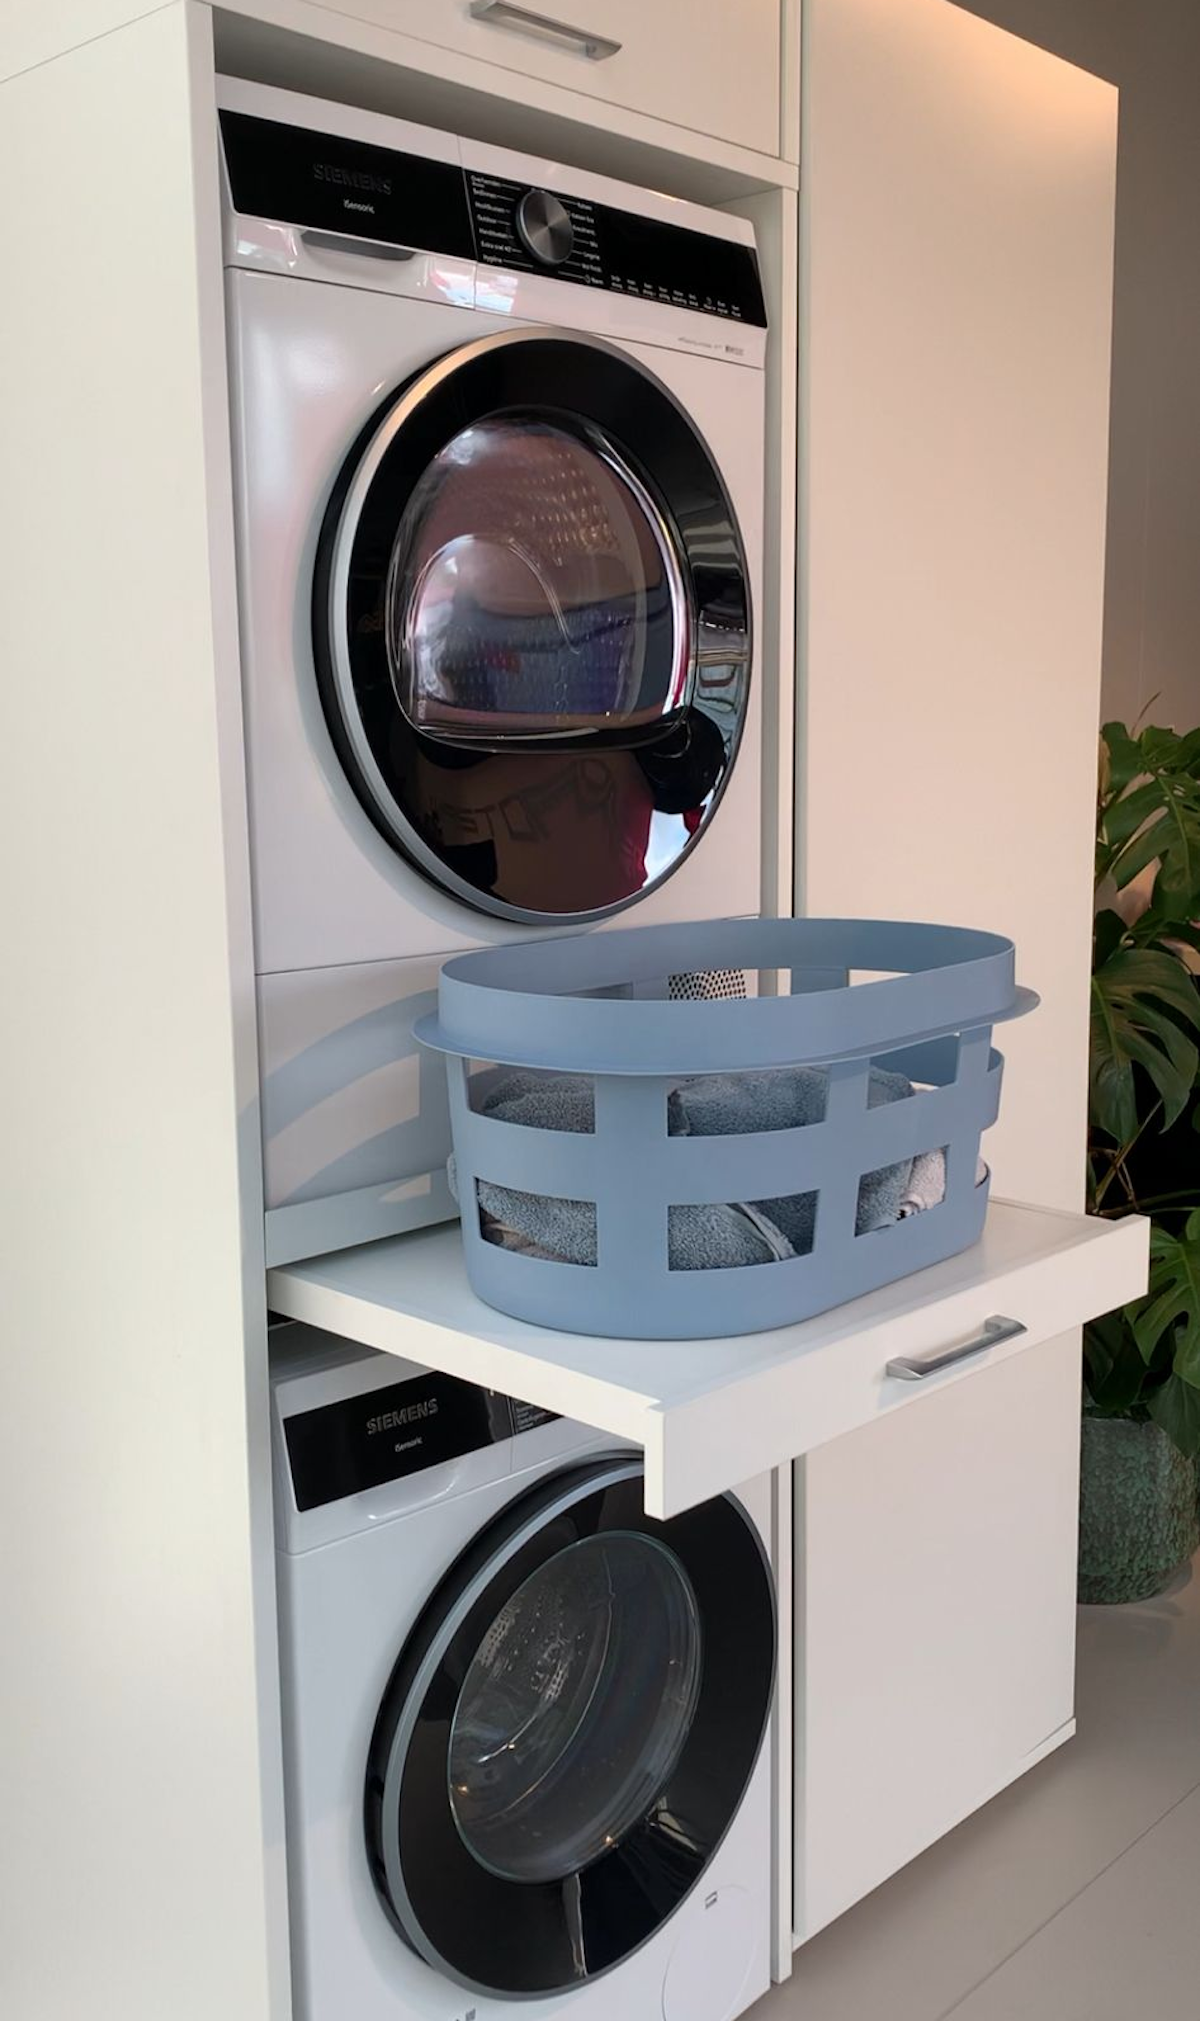 Is It Safe to Put a Tumble Dryer in a Cupboard? | WashTower